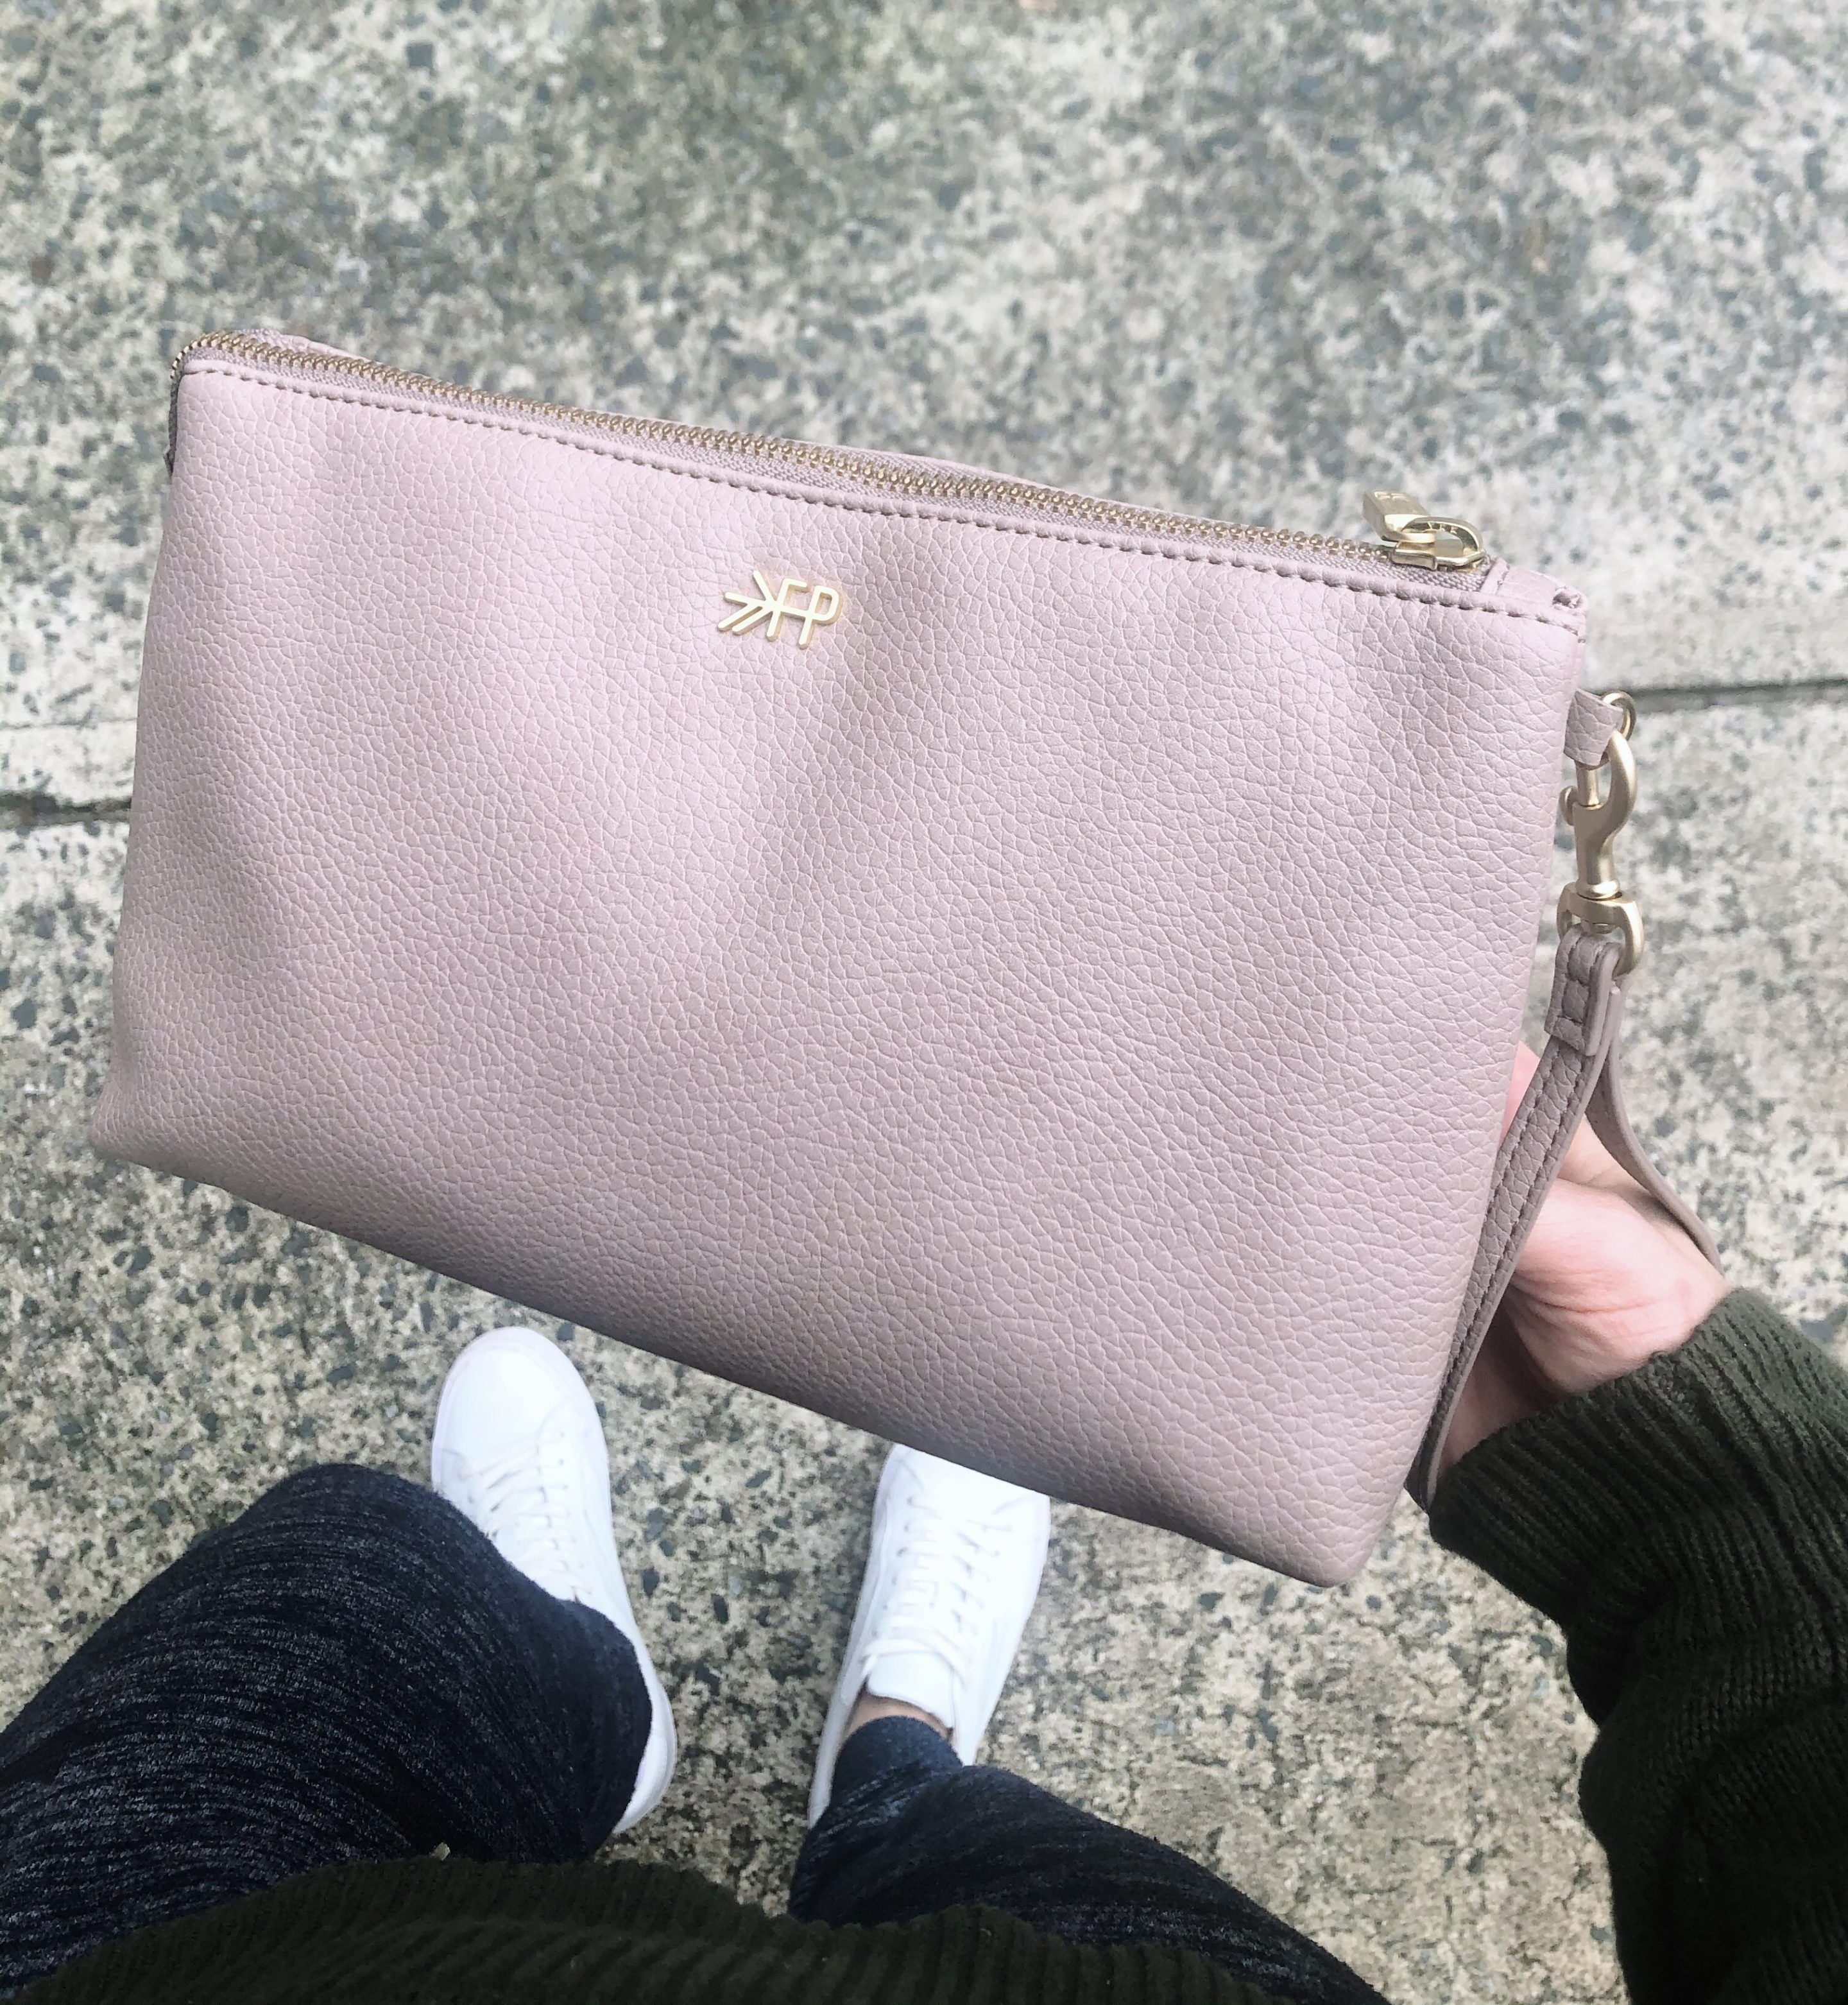 Clare V. bag haul - The Small Things Blog